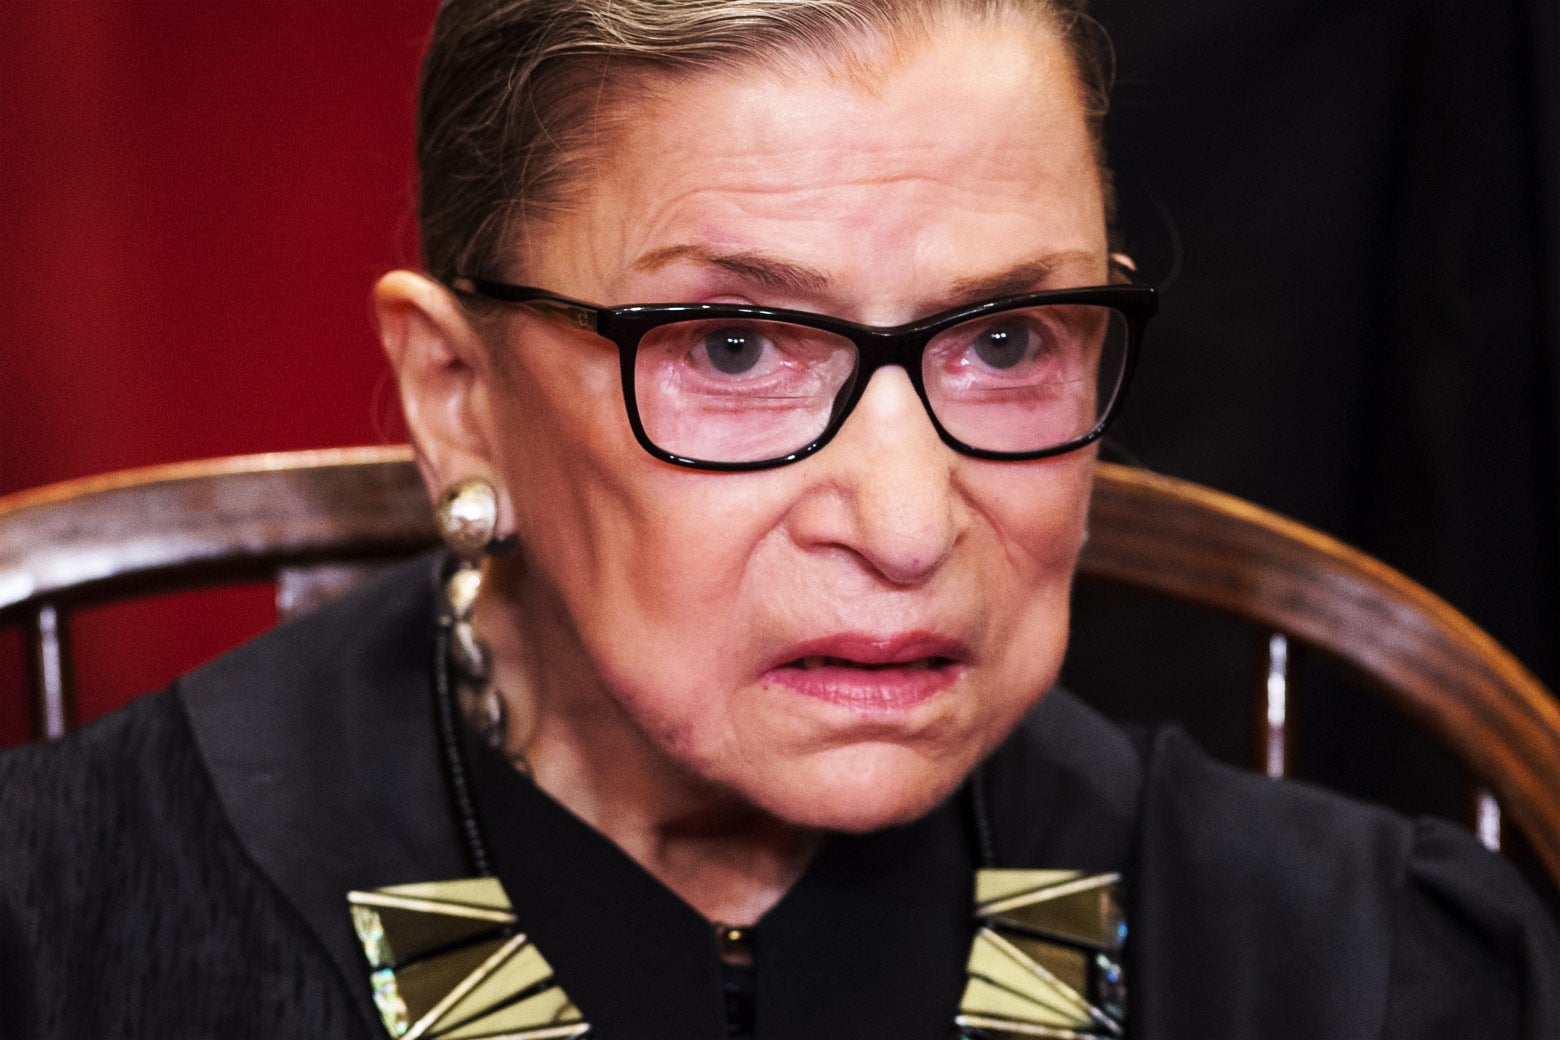 Supreme Court Associate Justice Ruth Bader Ginsburg sits for an official photo on June 1. Photo by Saul Loeb/AFP/Getty Images.